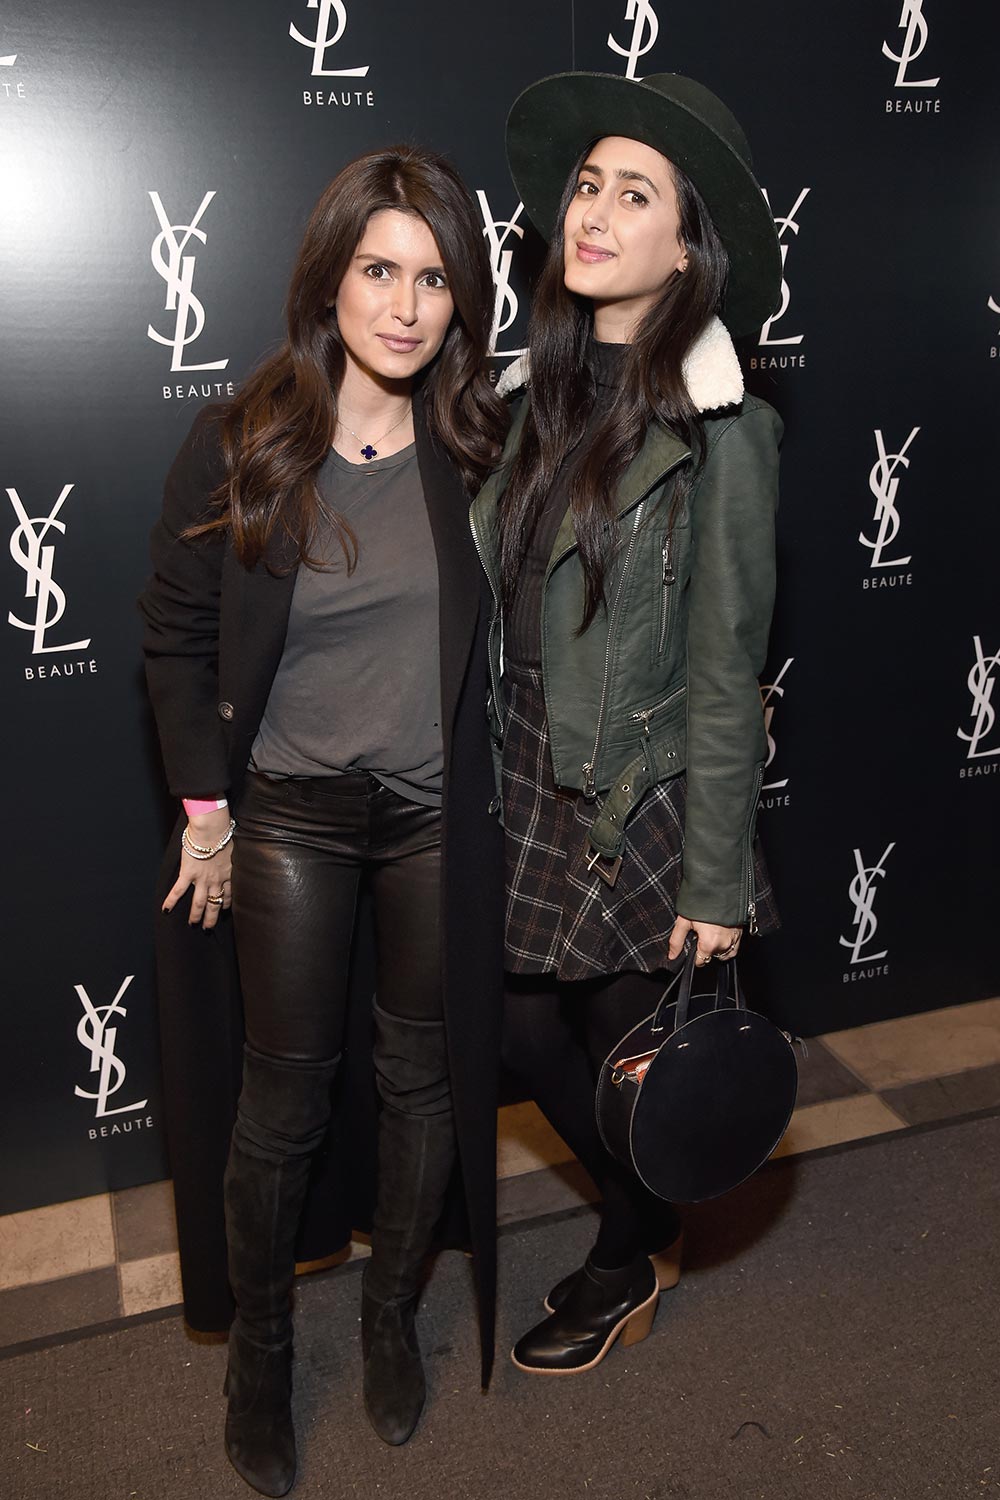 Roxy Sowlaty attends the YSL Beauty Club Party